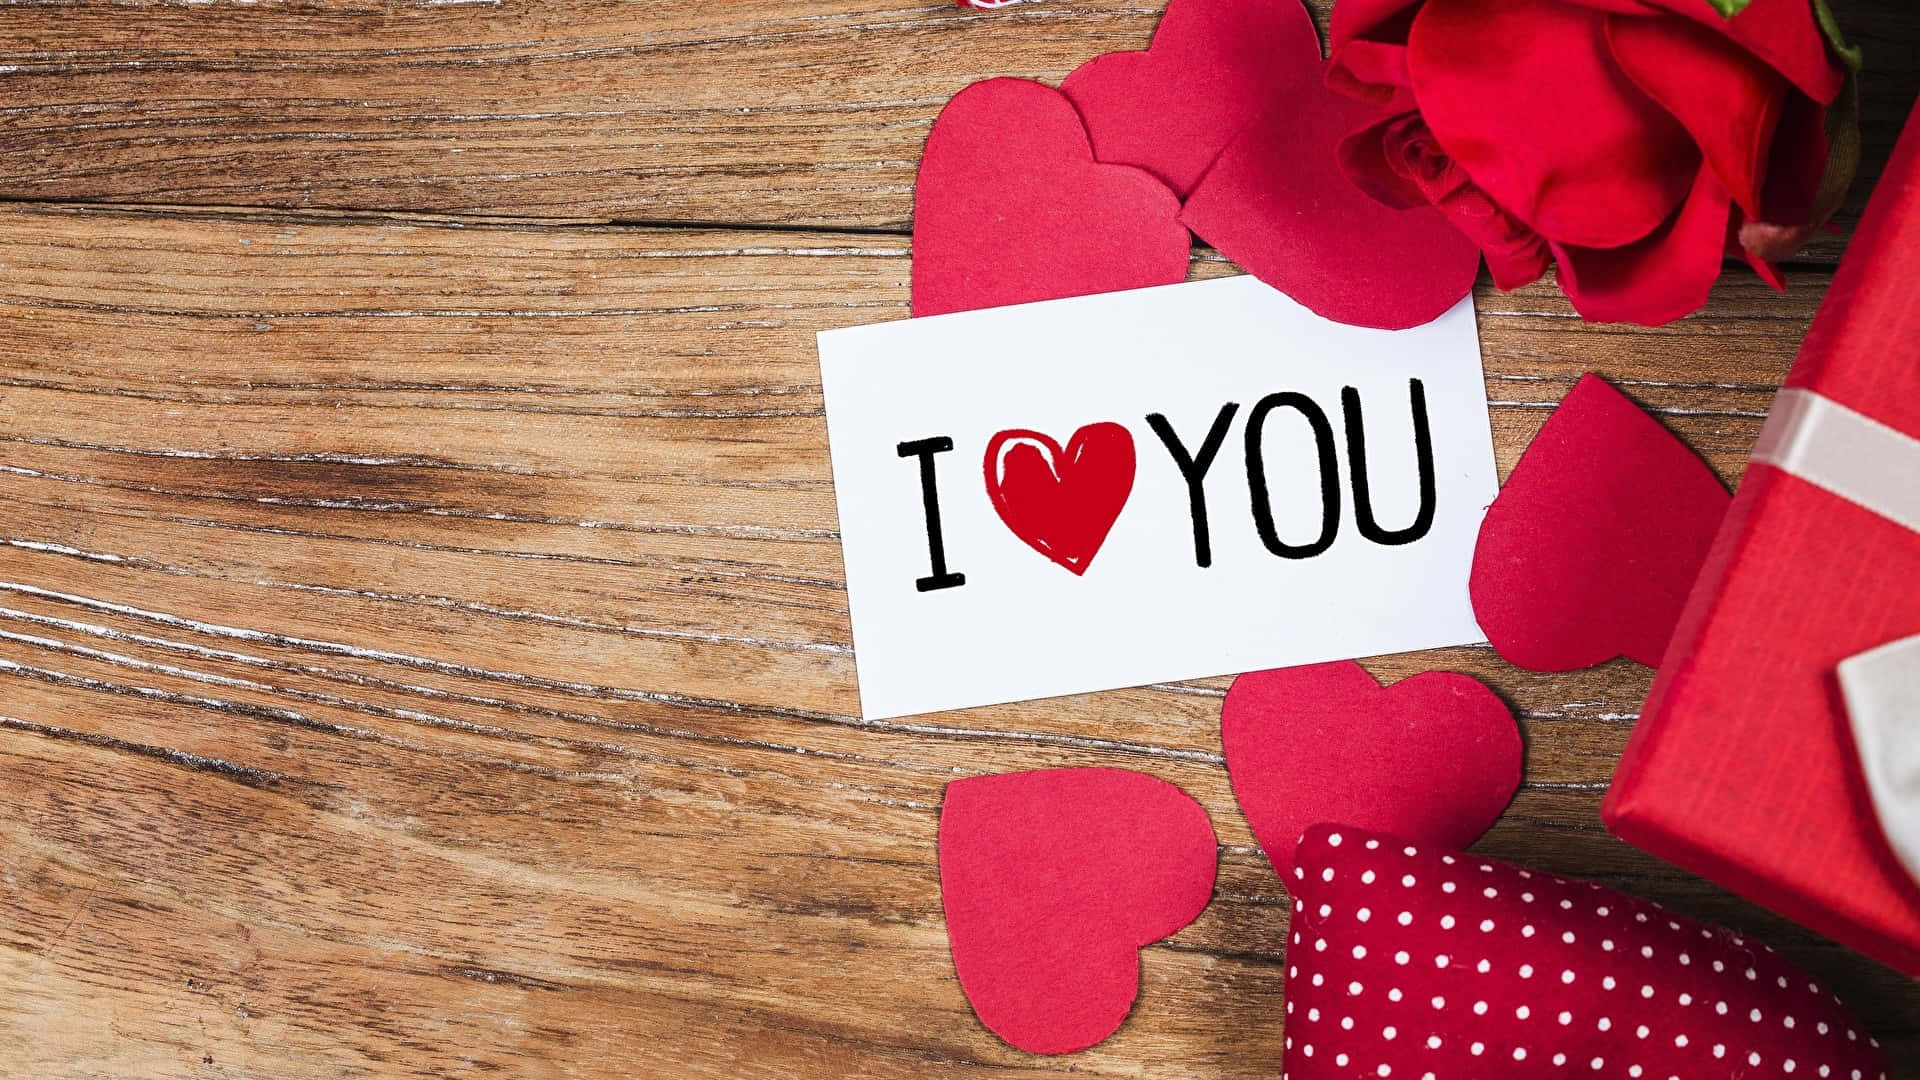 Tell that special someone how much you care with 3 words: "I Love You"